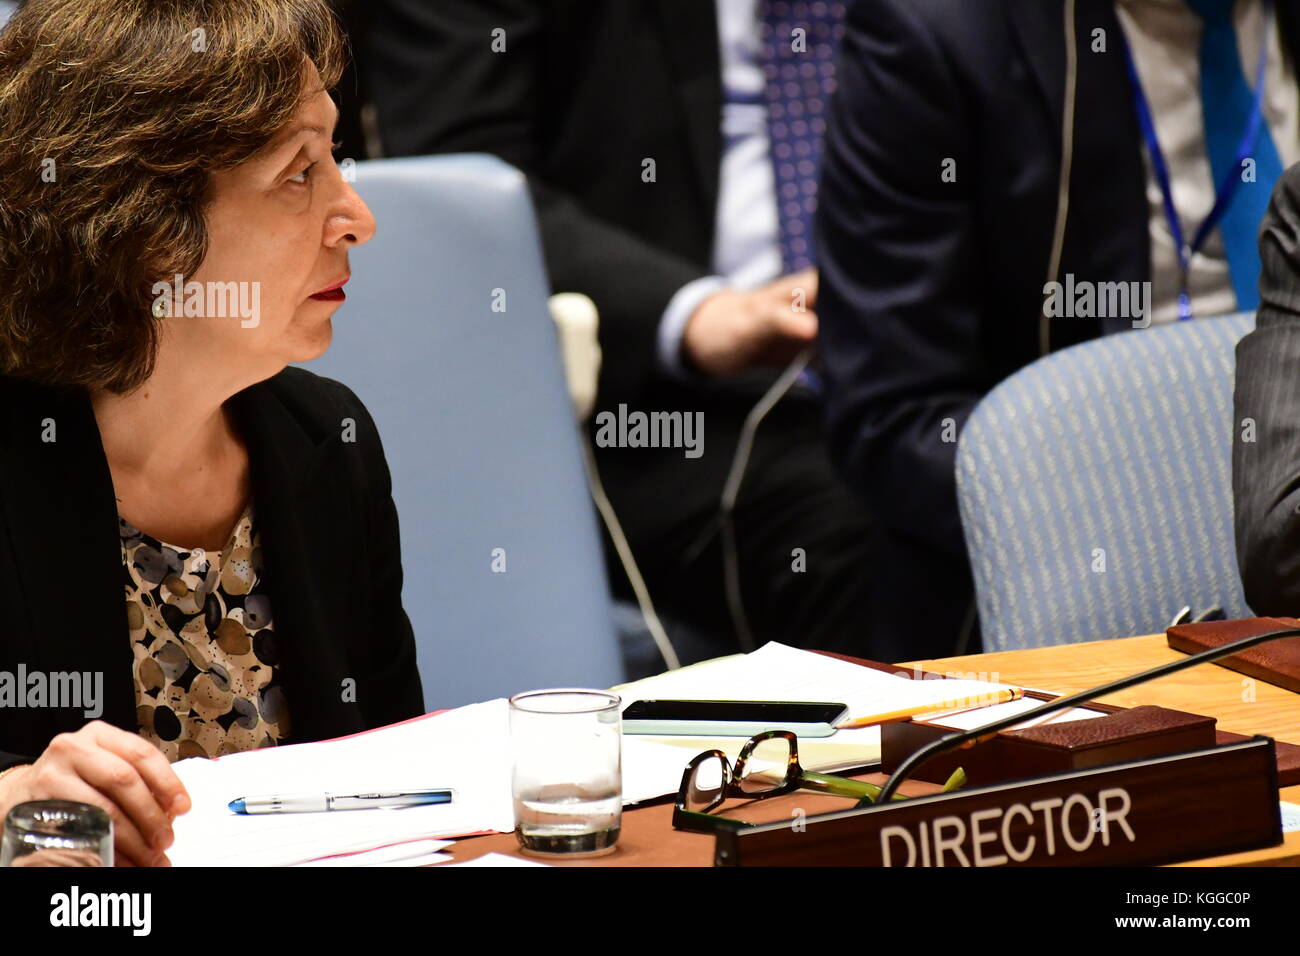 Manhattan, United States. 07th Nov, 2017. The United Nations Security Council members heard a report on the status of Bosnia-Herzegovina from UN High Representative Valentin Inzko, after which the body voted to renew Resolution 2384 to continue support of the EUFOR Althea force, a continuous UN peace-keeping force deployed in the region since 2004 Credit: Andy Katz/Pacific Press/Alamy Live News Stock Photo